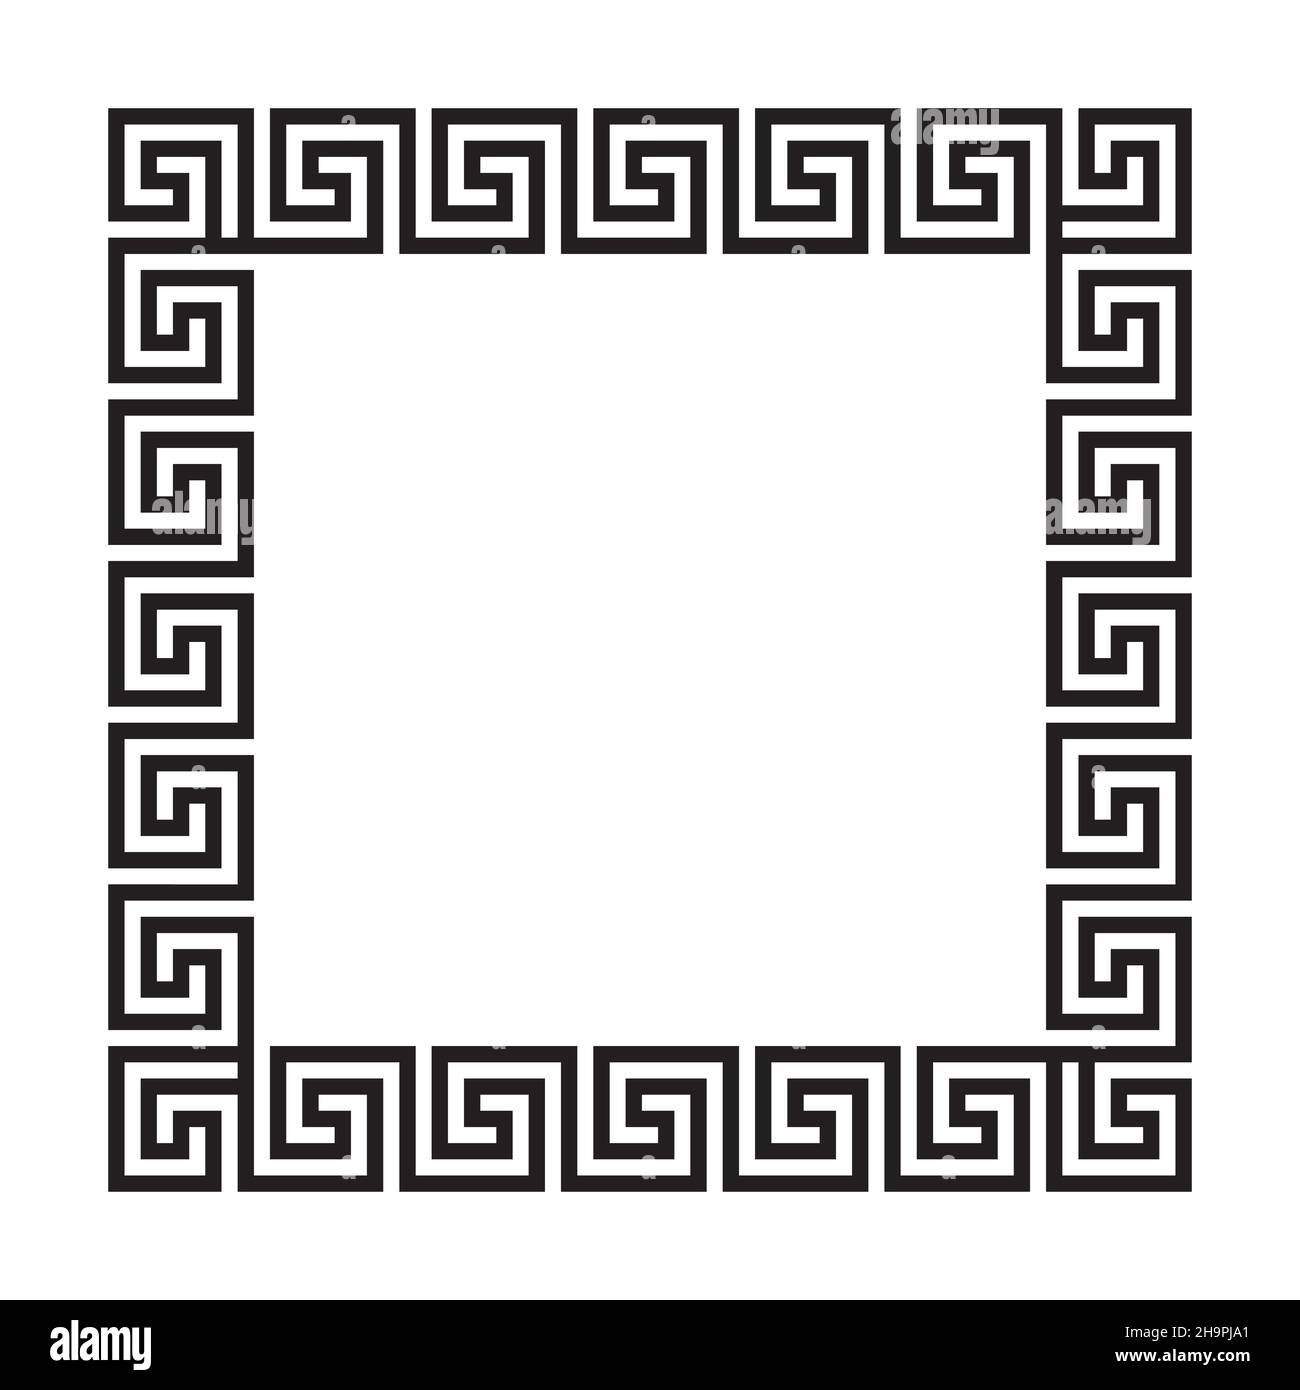 Greek Pattern Black and White Stock Photos & Images - Alamy